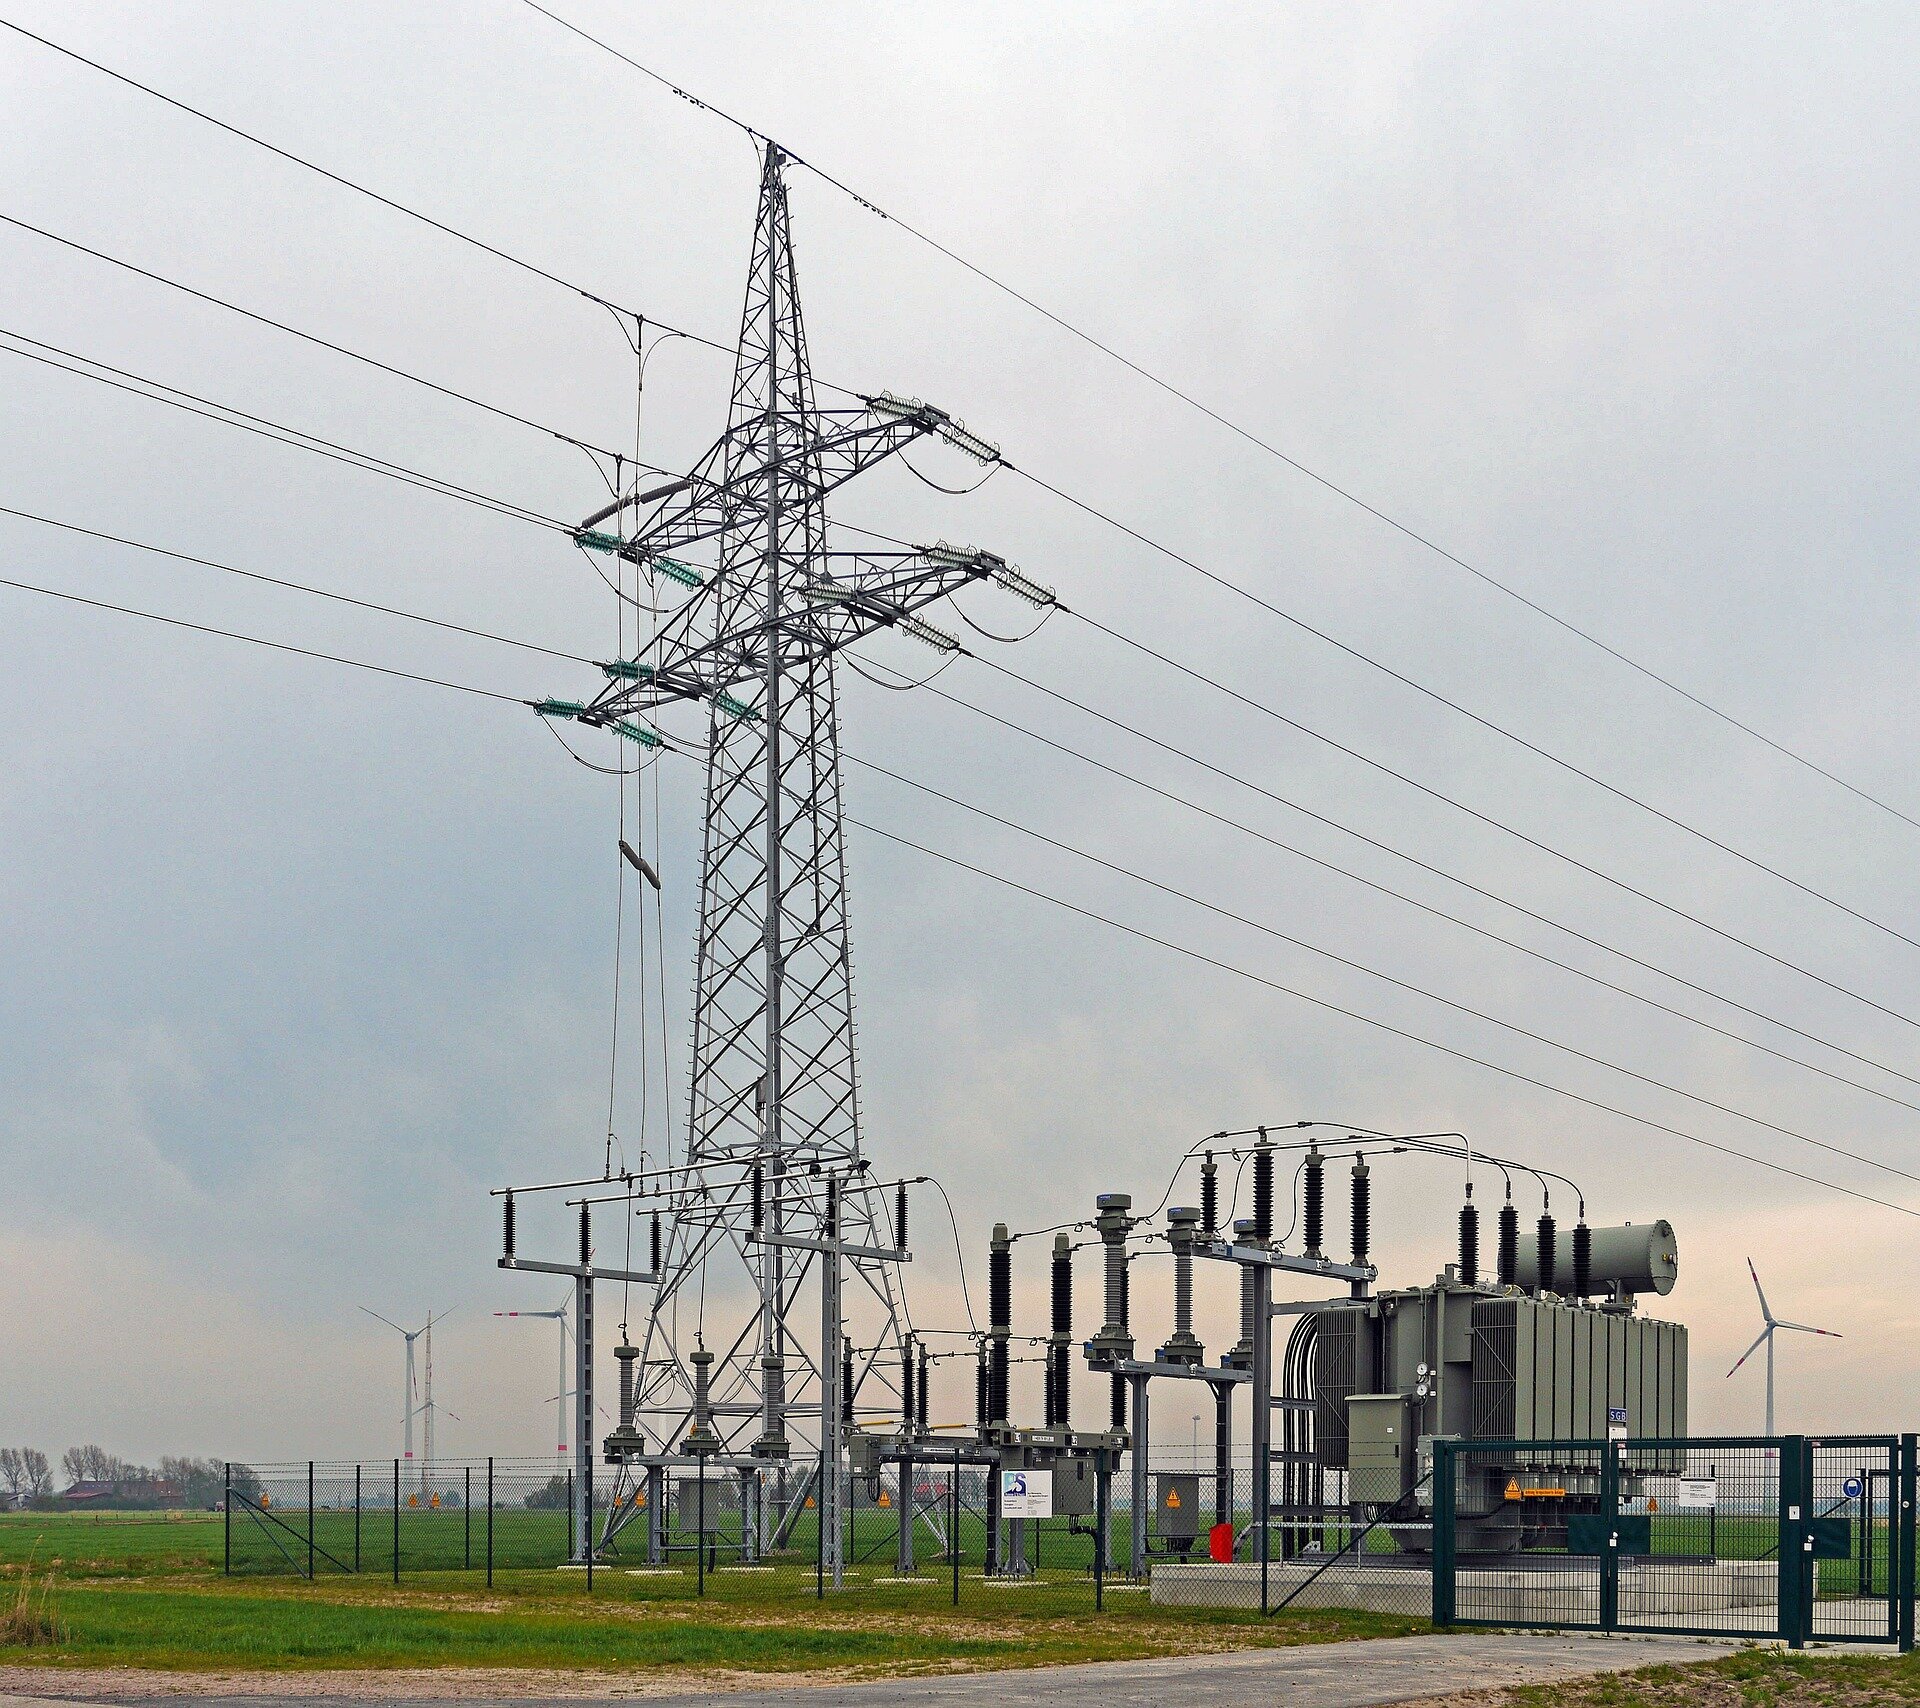 Management strategy to mitigate power demand surges, increase grid reliability and reduce costs